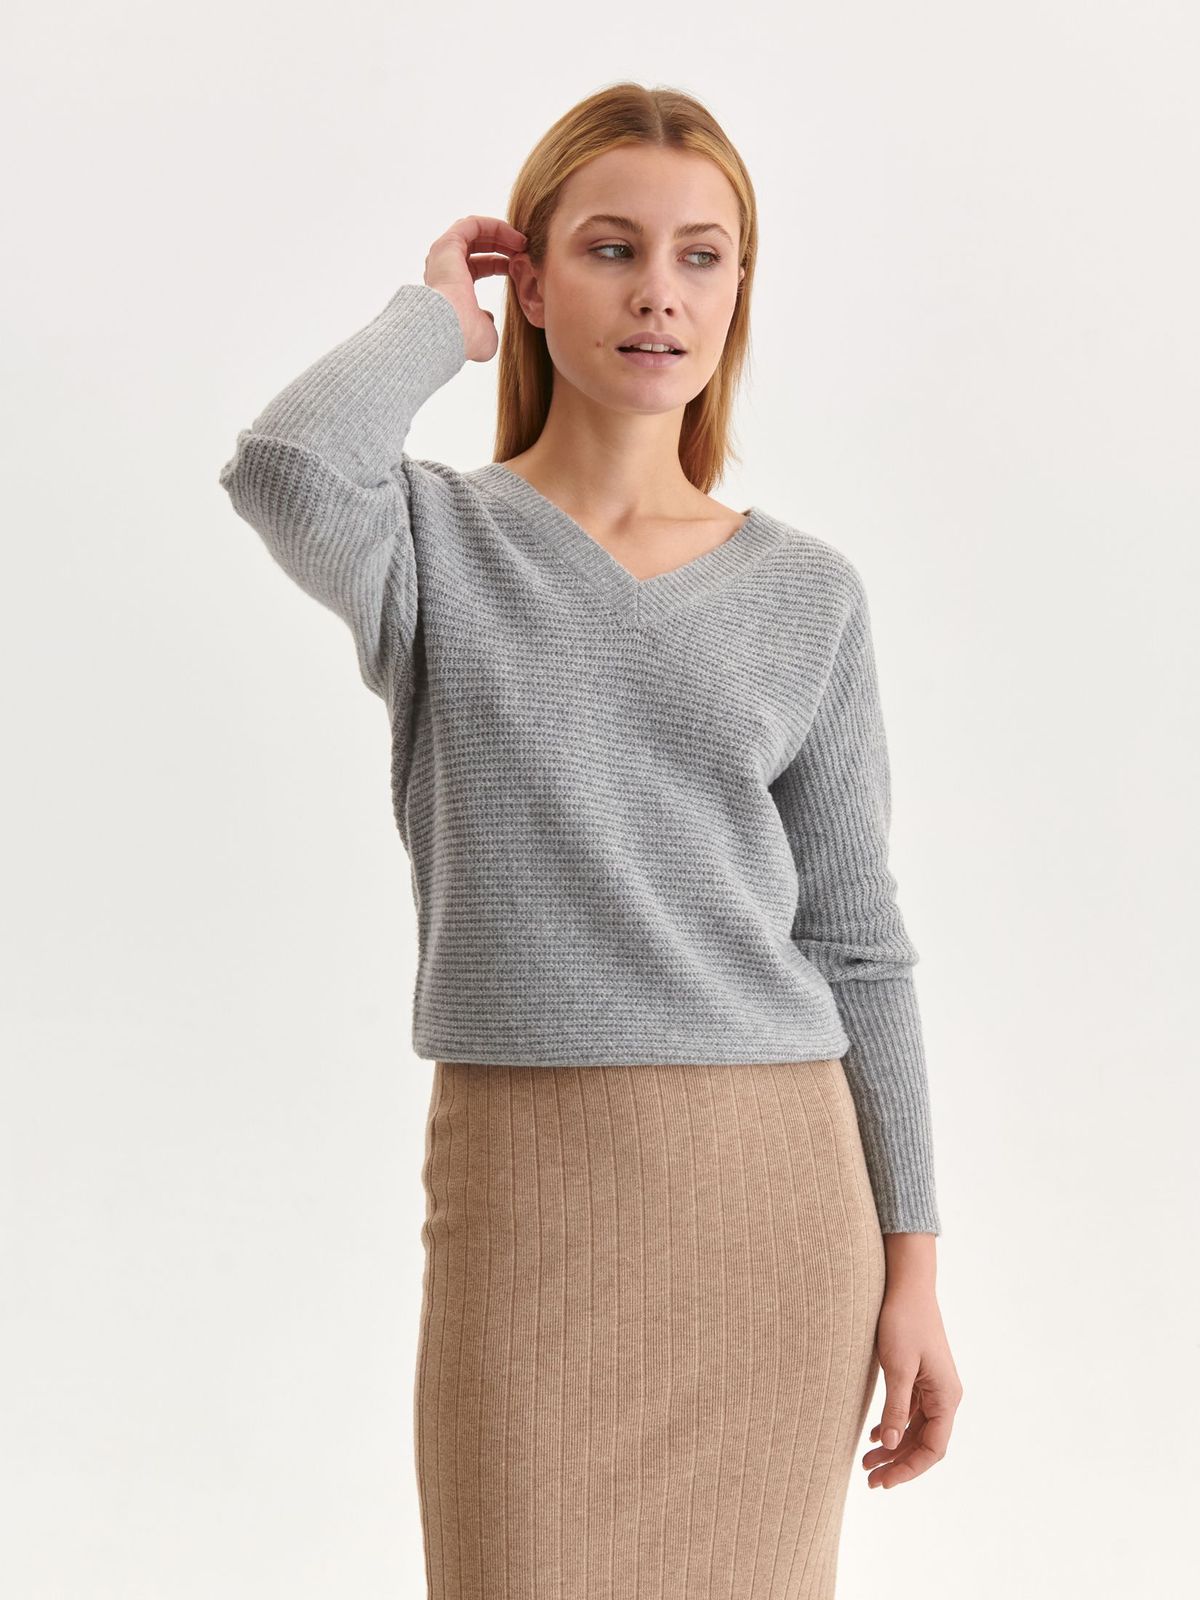 Grey sweater knitted loose fit with v-neckline